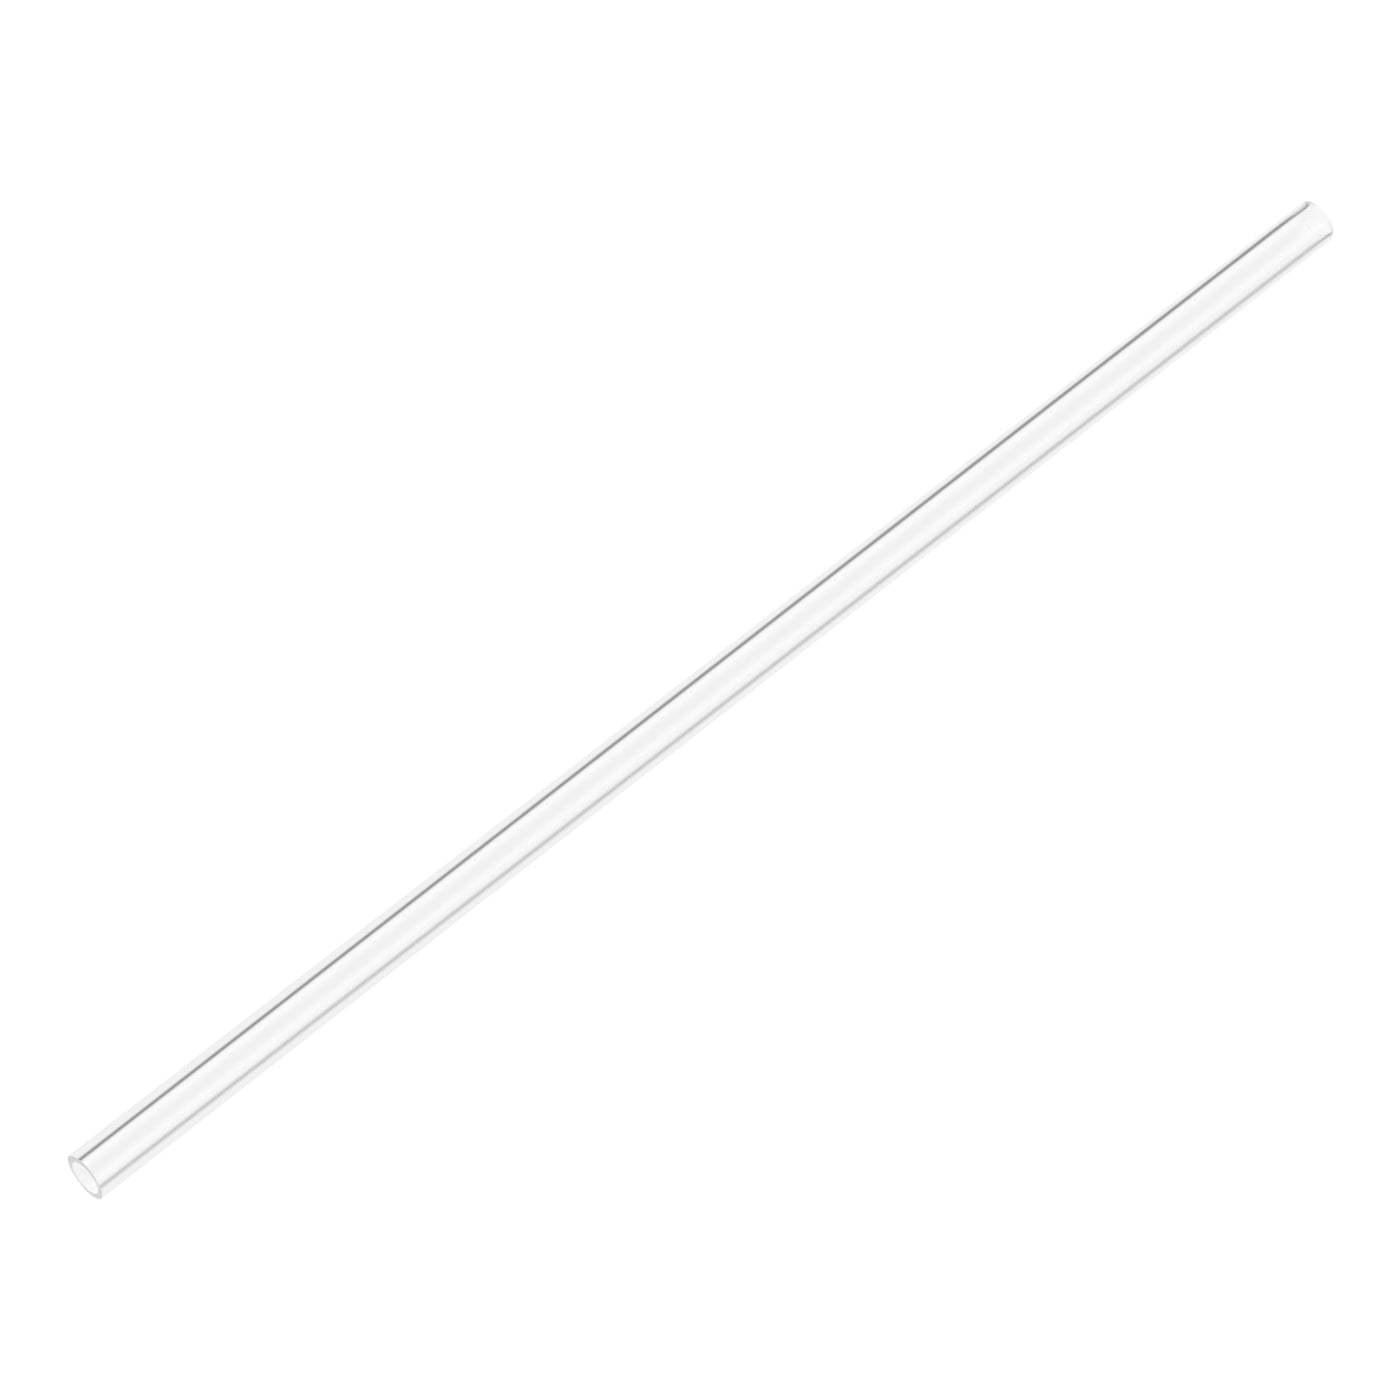 uxcell Uxcell Rigid Acrylic Pipes Round Tube Tubing